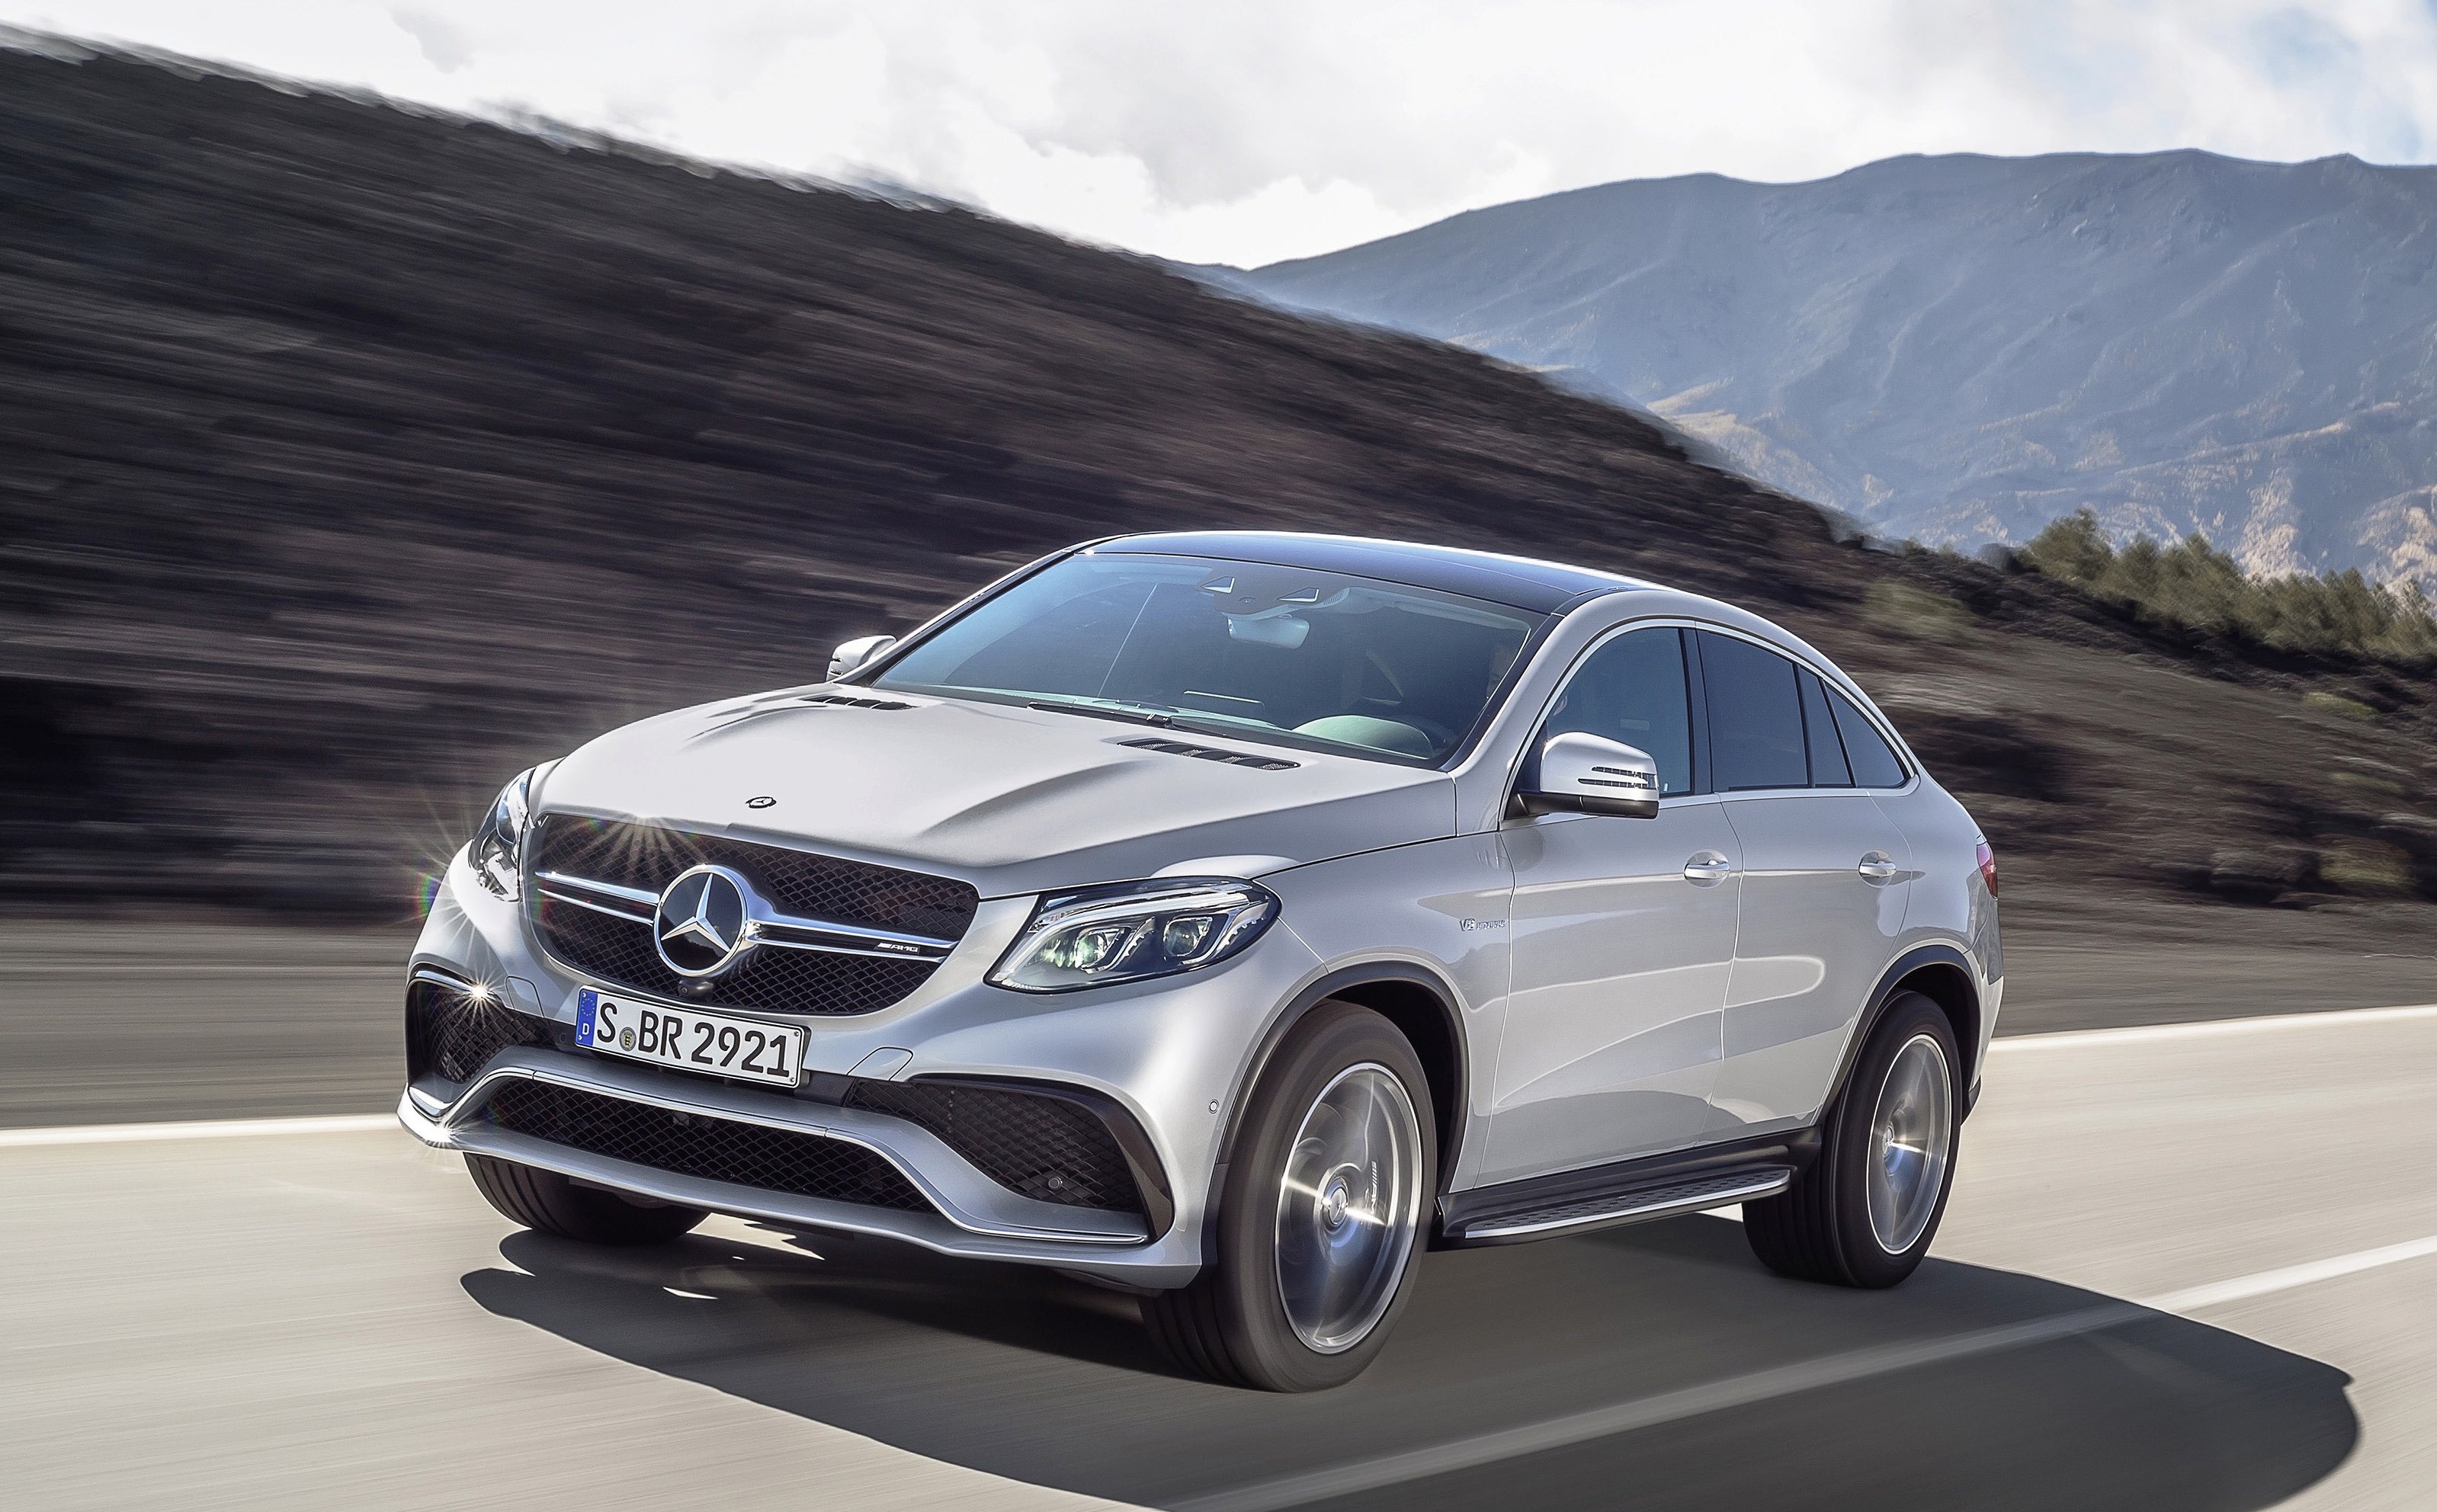 Mercedes Benz Gle Coupe Wallpaper Image Photos Pictures